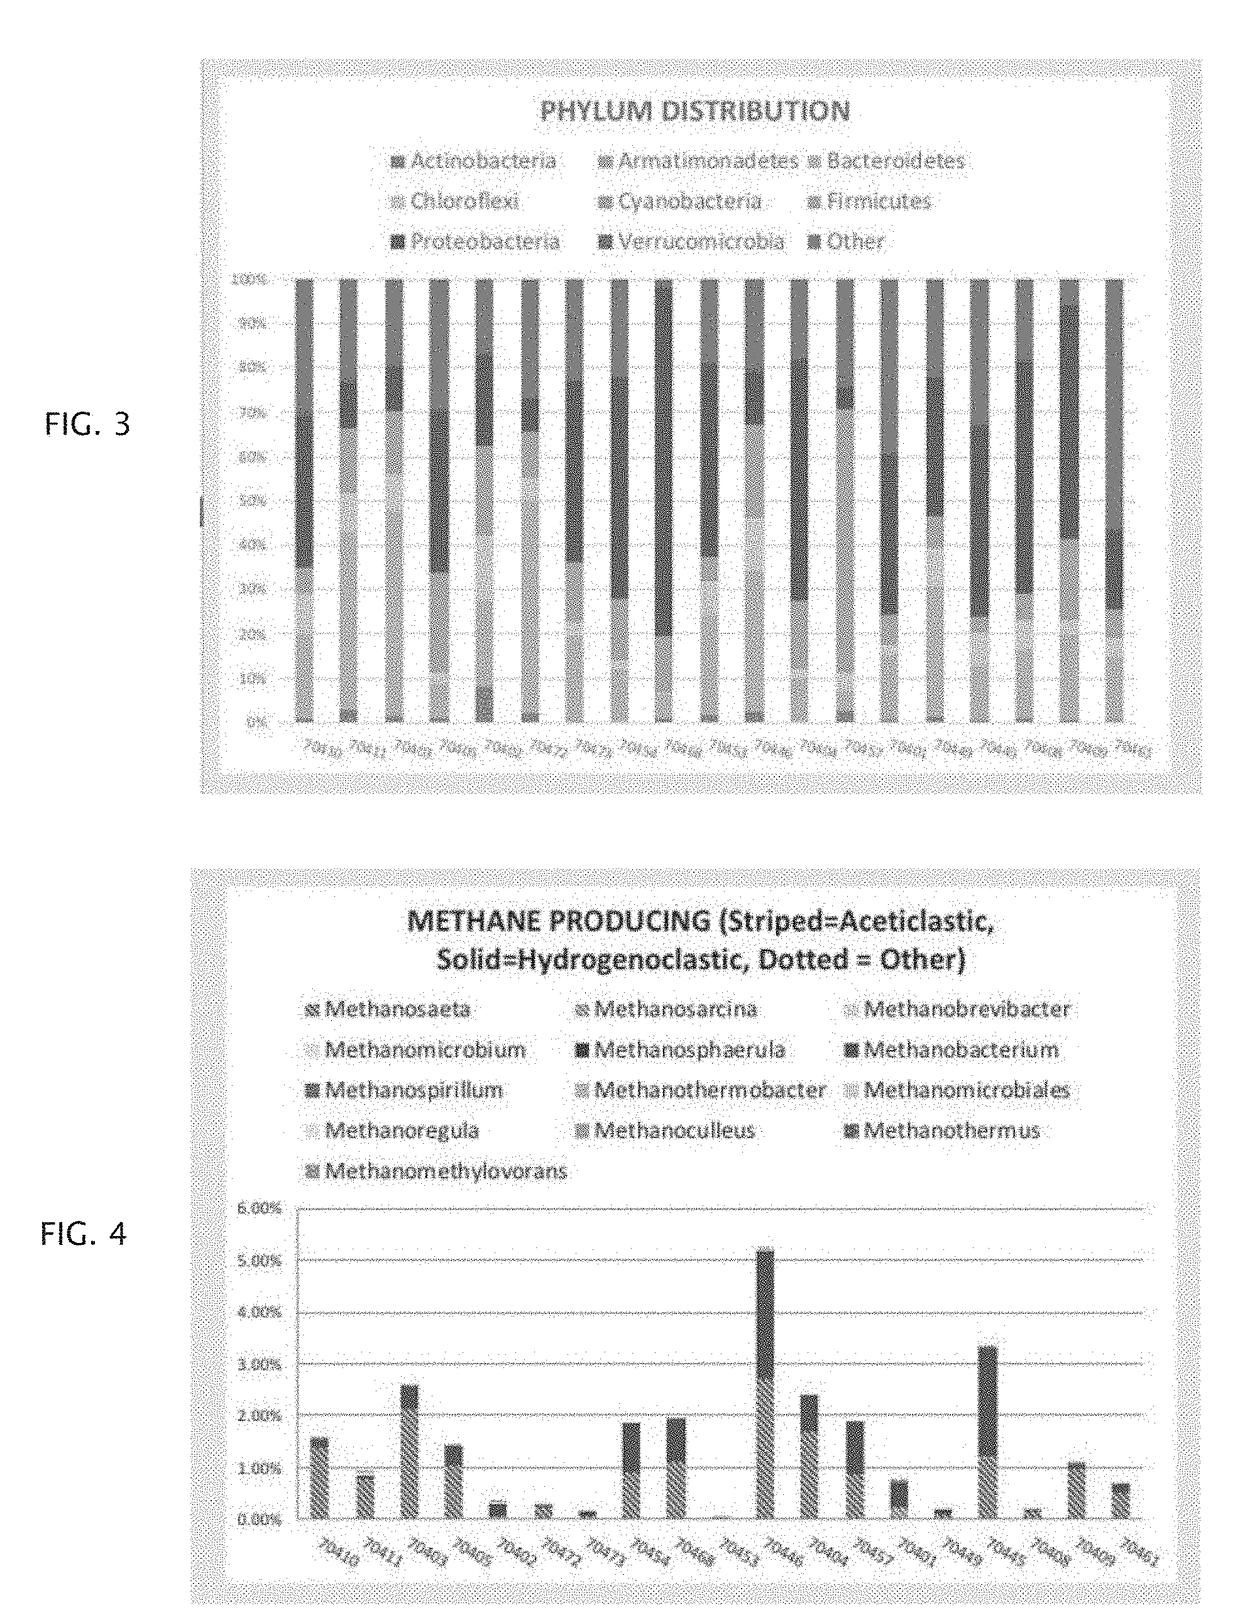 Method of using microbial DNA sequencing in recovering renewable resources from wastewater and other waste streams